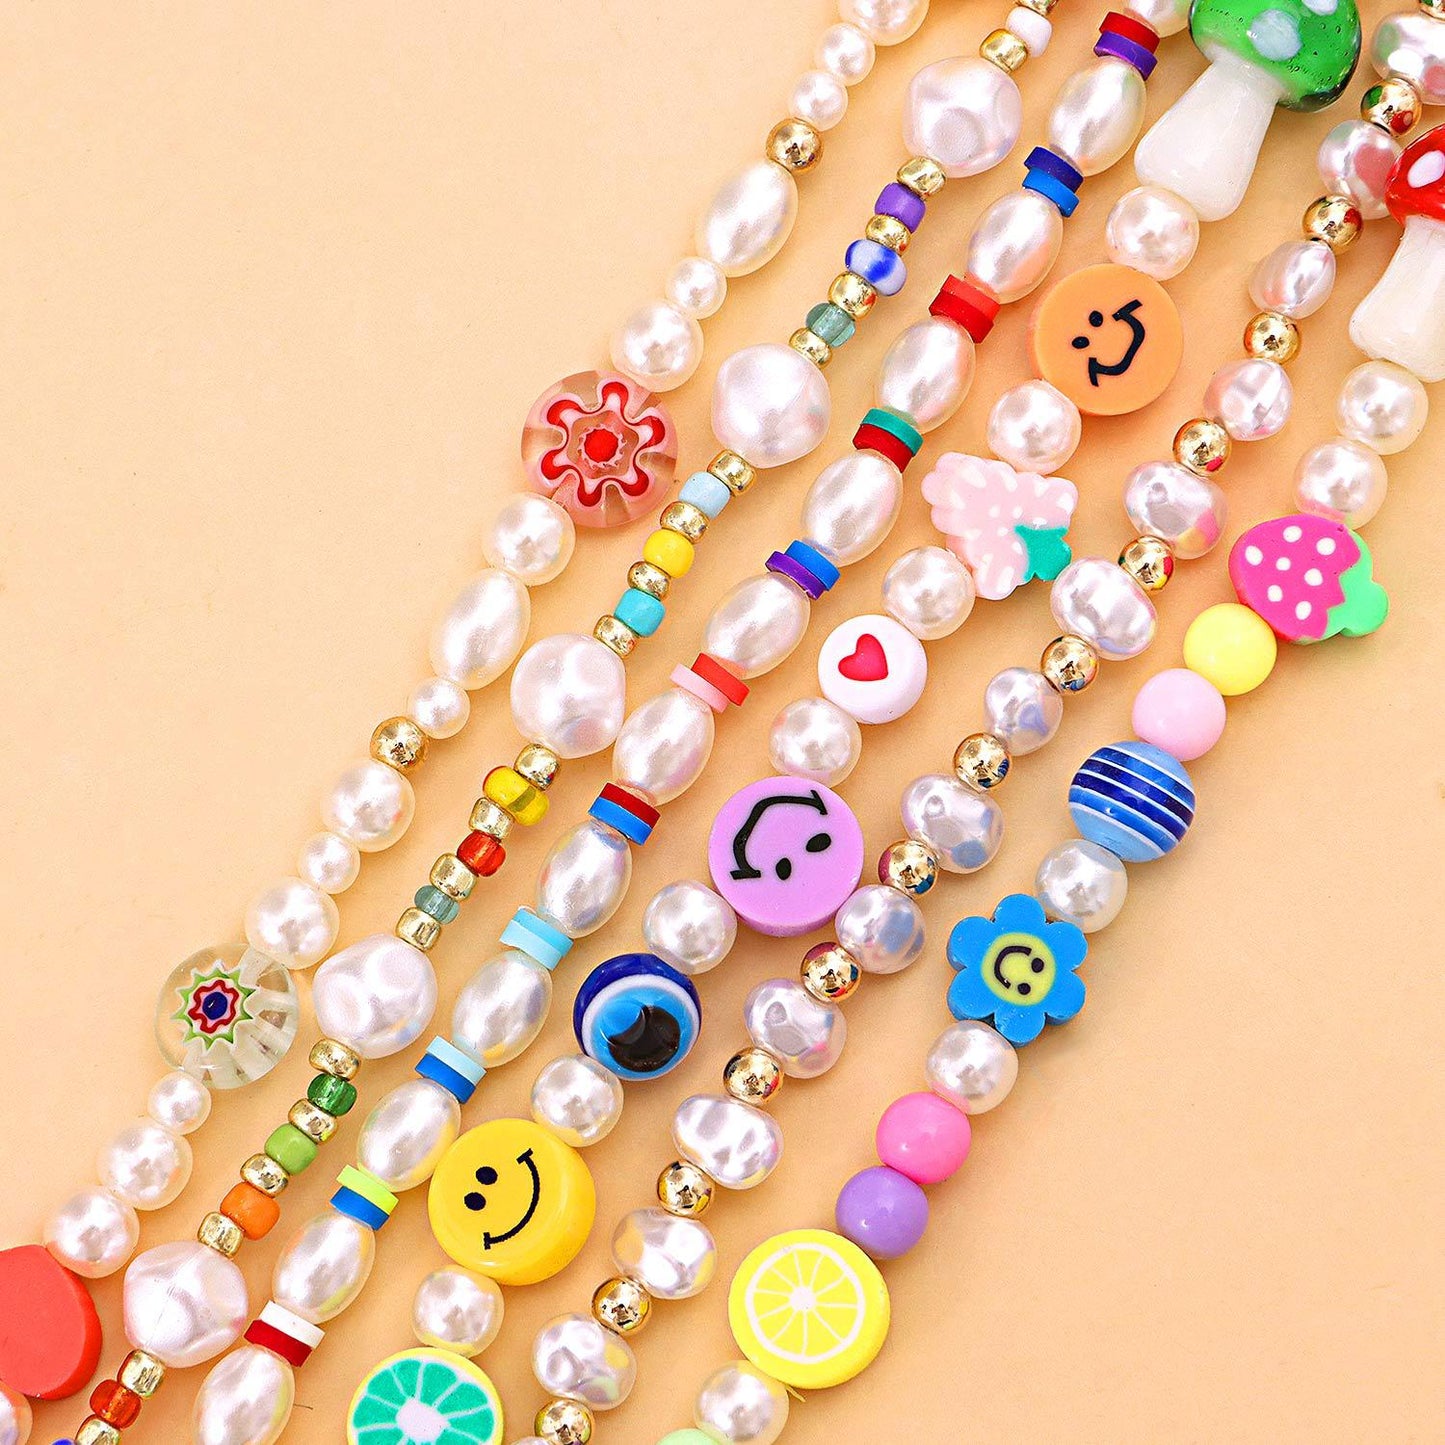 Ethnic Style Fruit Smiley Face Mixed Materials Beaded Necklace